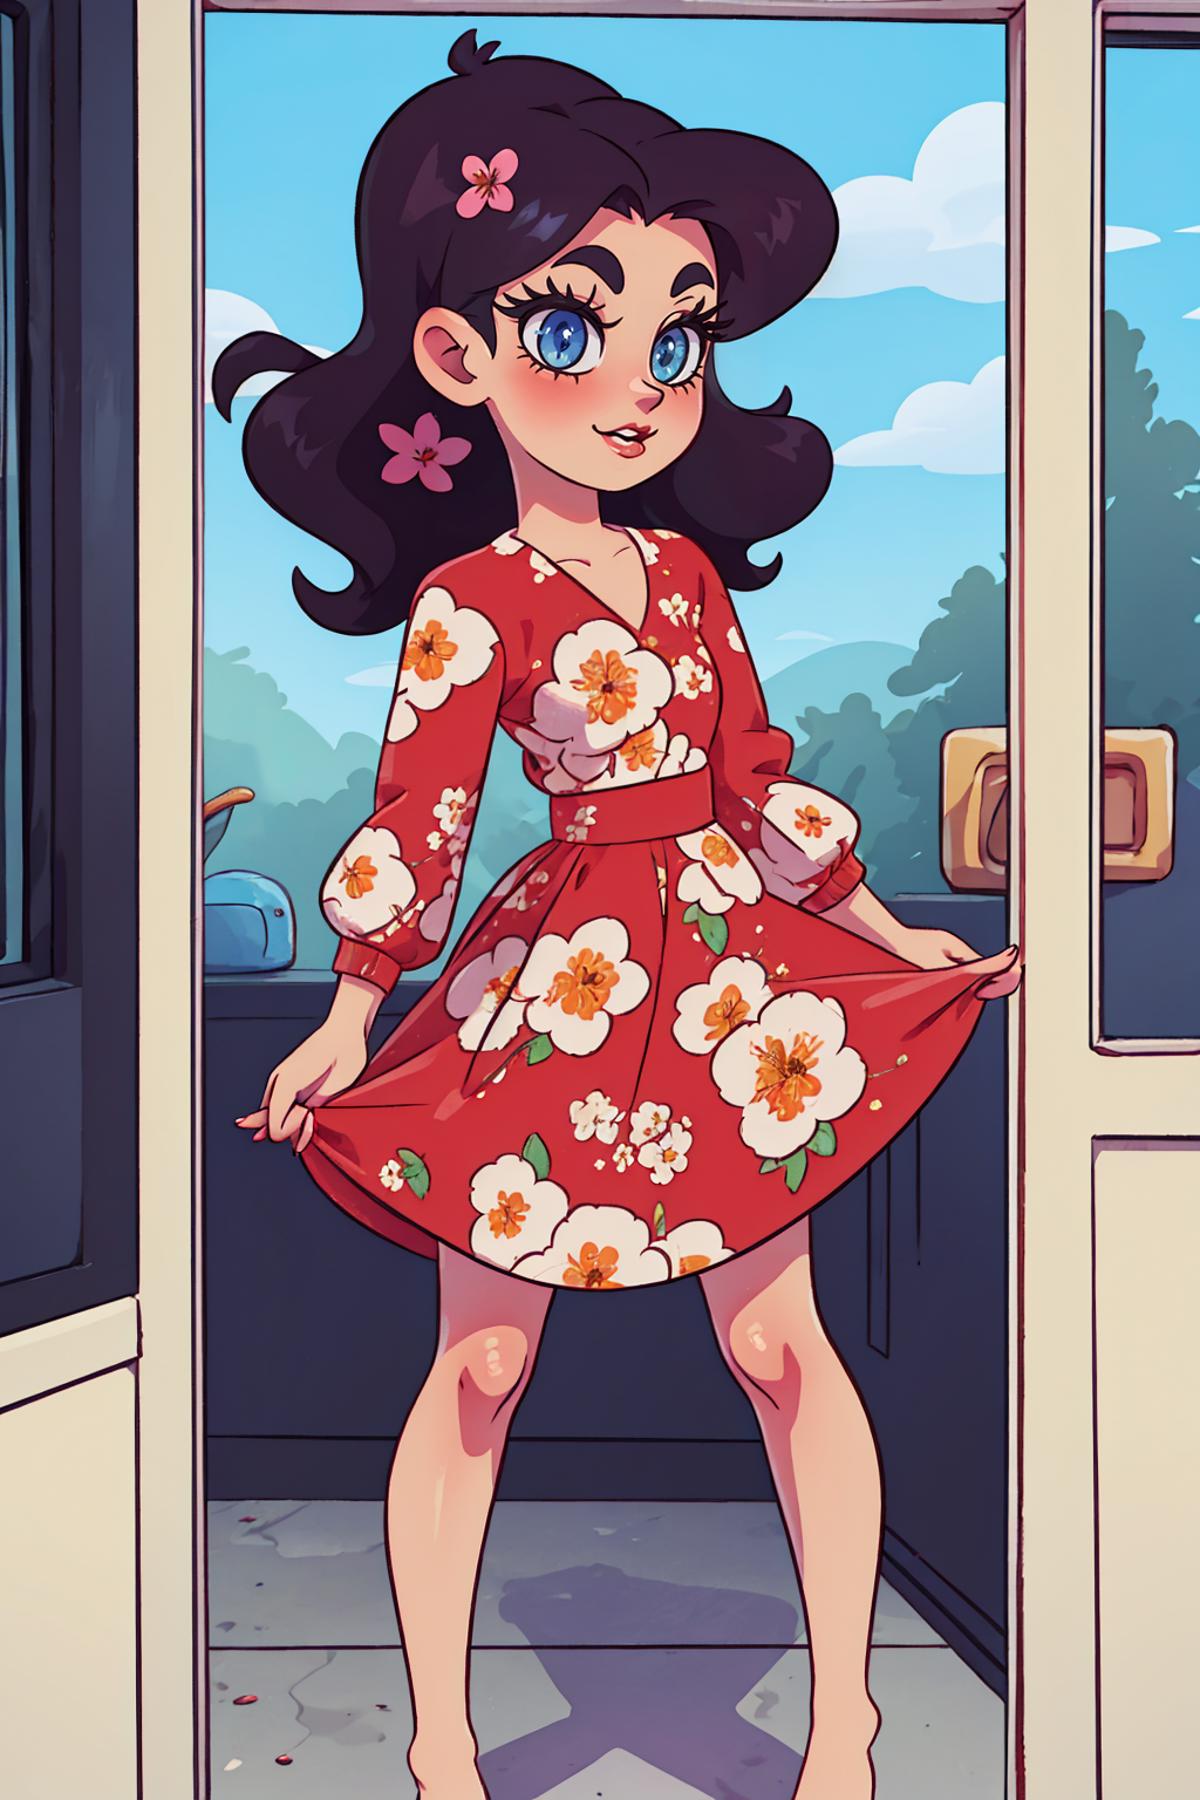 A cartoon girl in a red dress with white flowers on it is shown standing in a doorway.